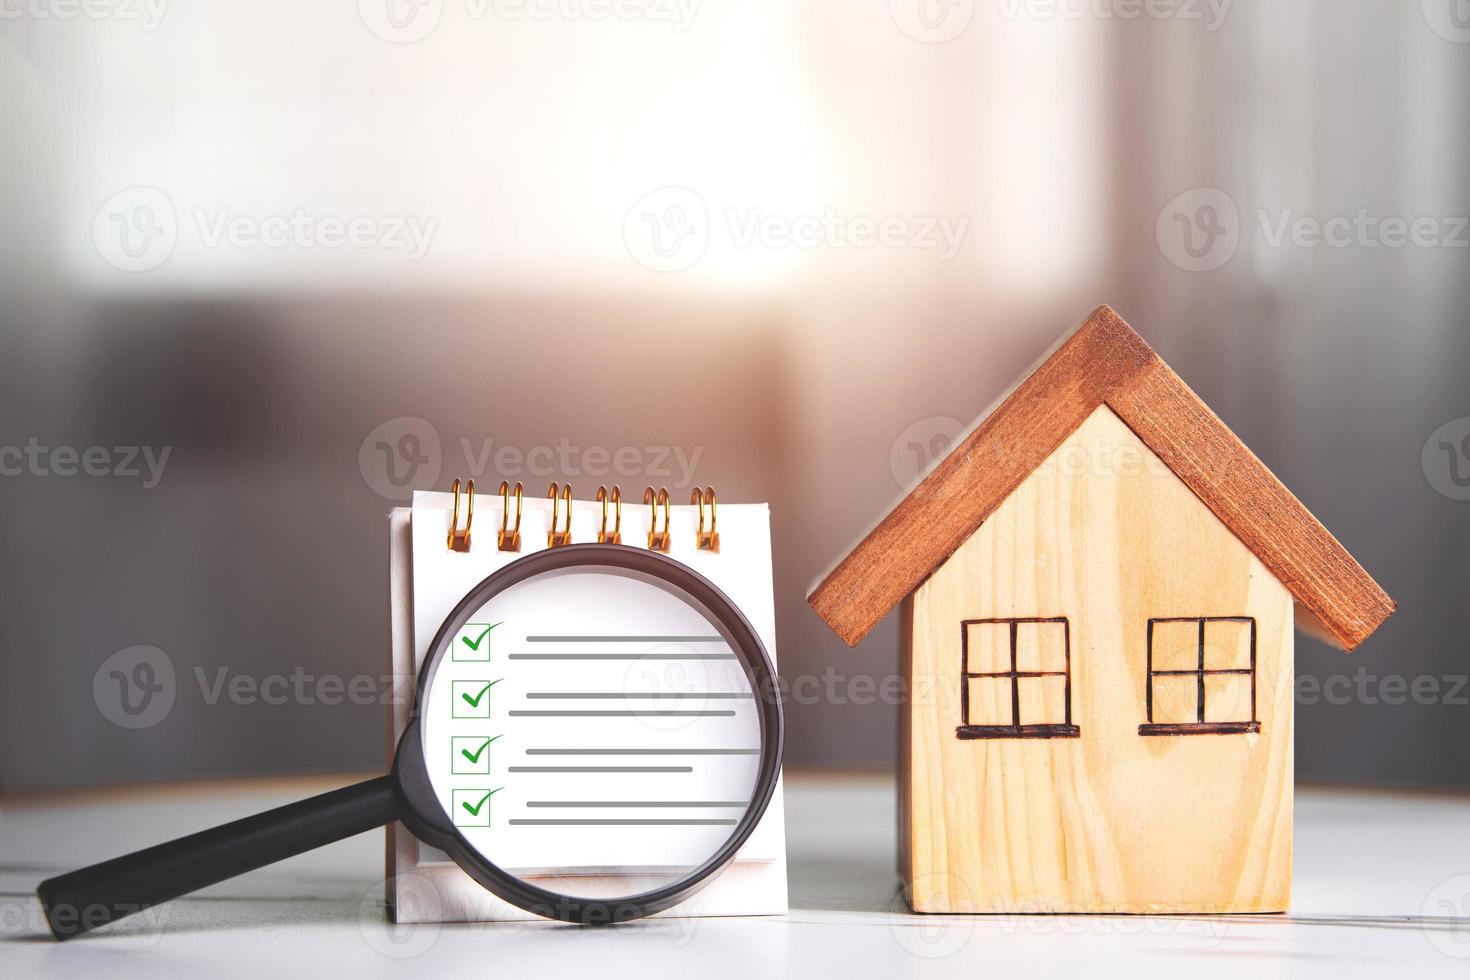 Home inspections, standards according to the requirements,  certifications, and real estate safety. Wooden house and magnifying glass with a checklist for home with copy space photo